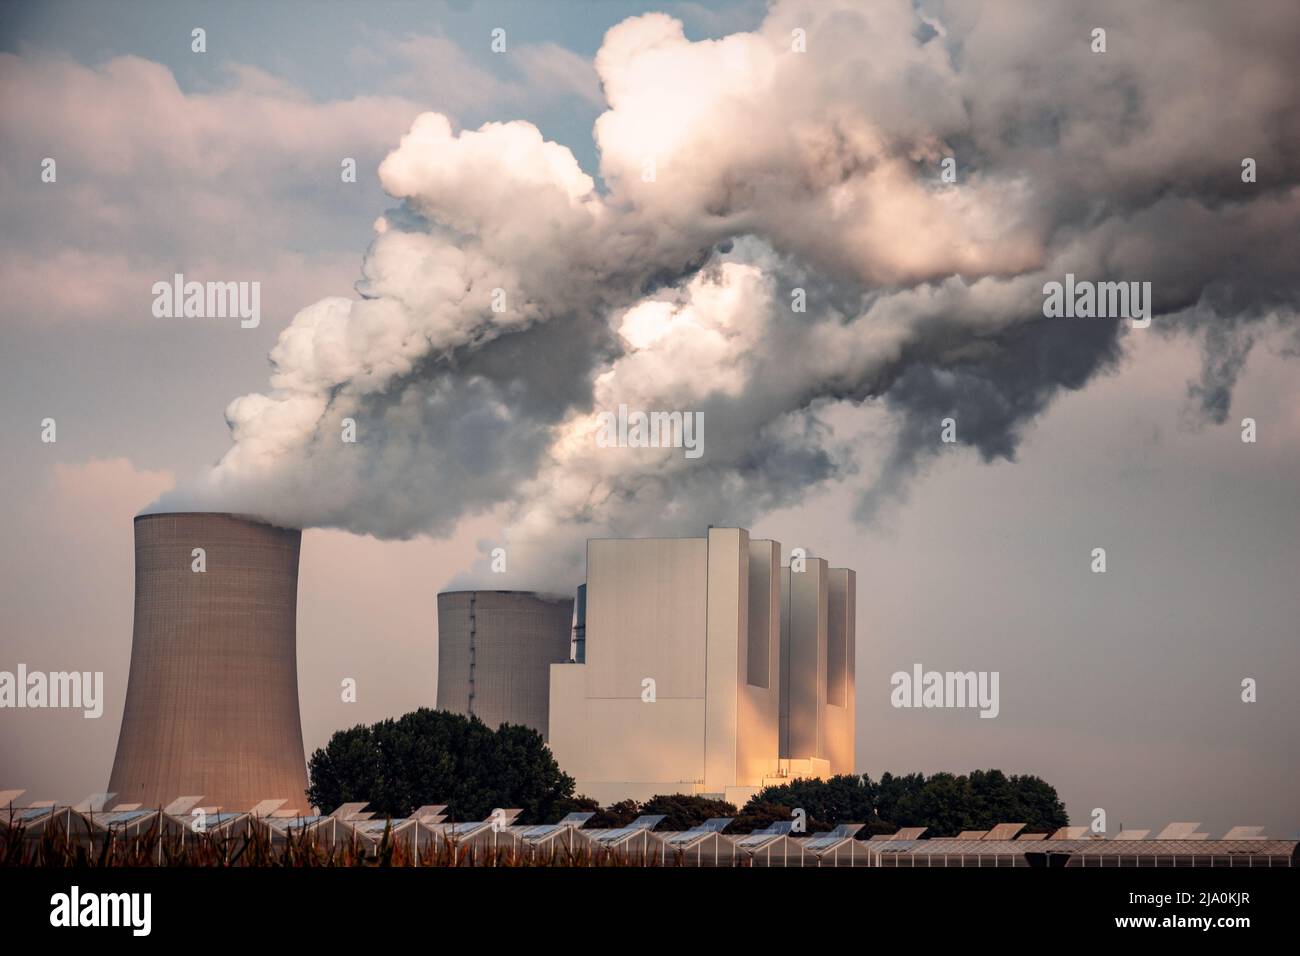 Power plant factory chimney emissions causing air pollution. Stock Photo